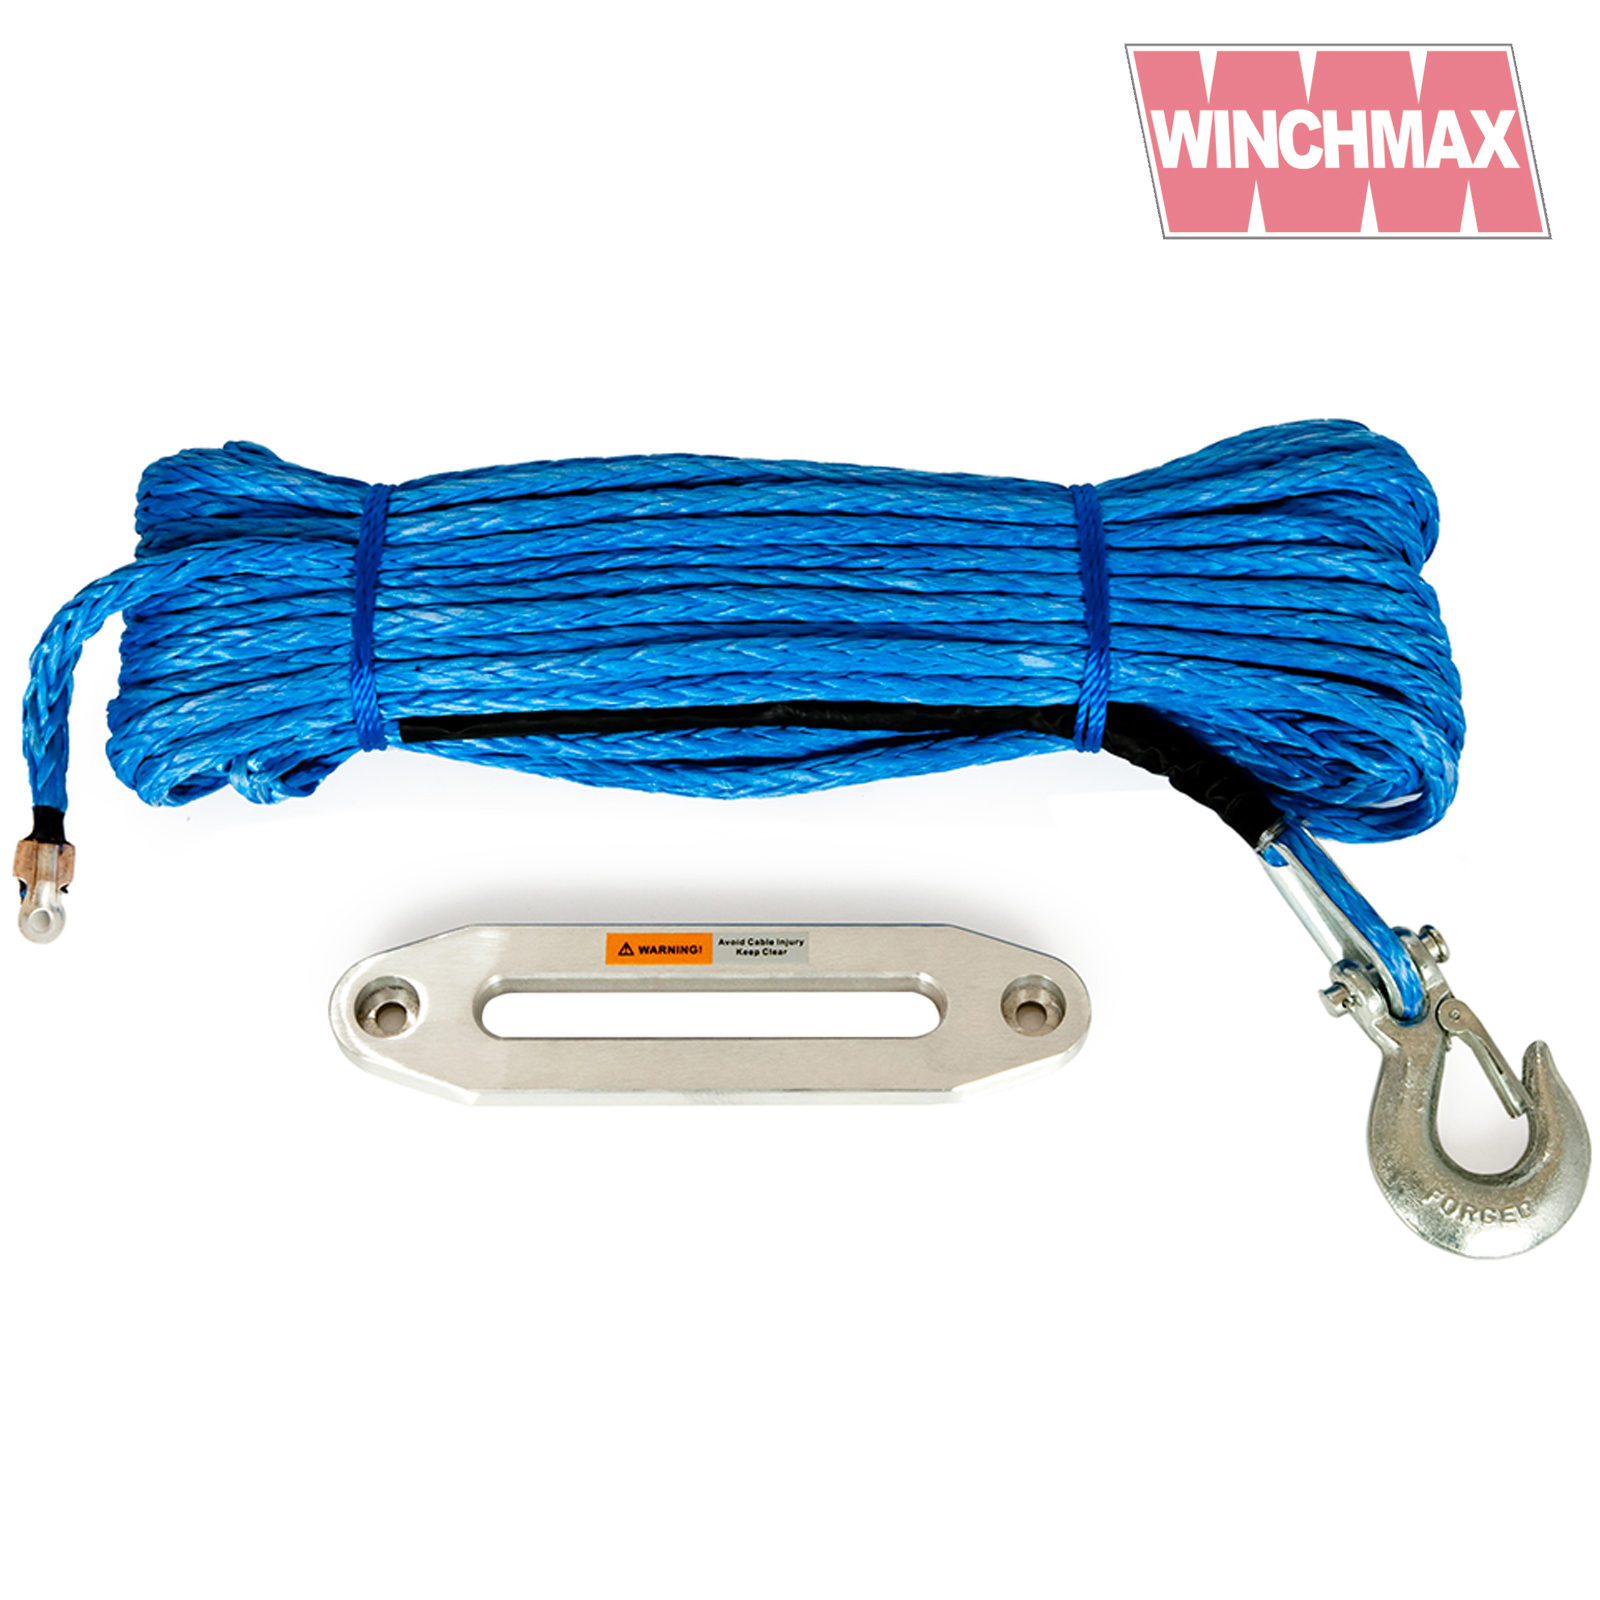 Synthetic Winch Rope 45m x 11mm, Screw Fix. 3/8 Inch Clevis Hook. - Winchmax